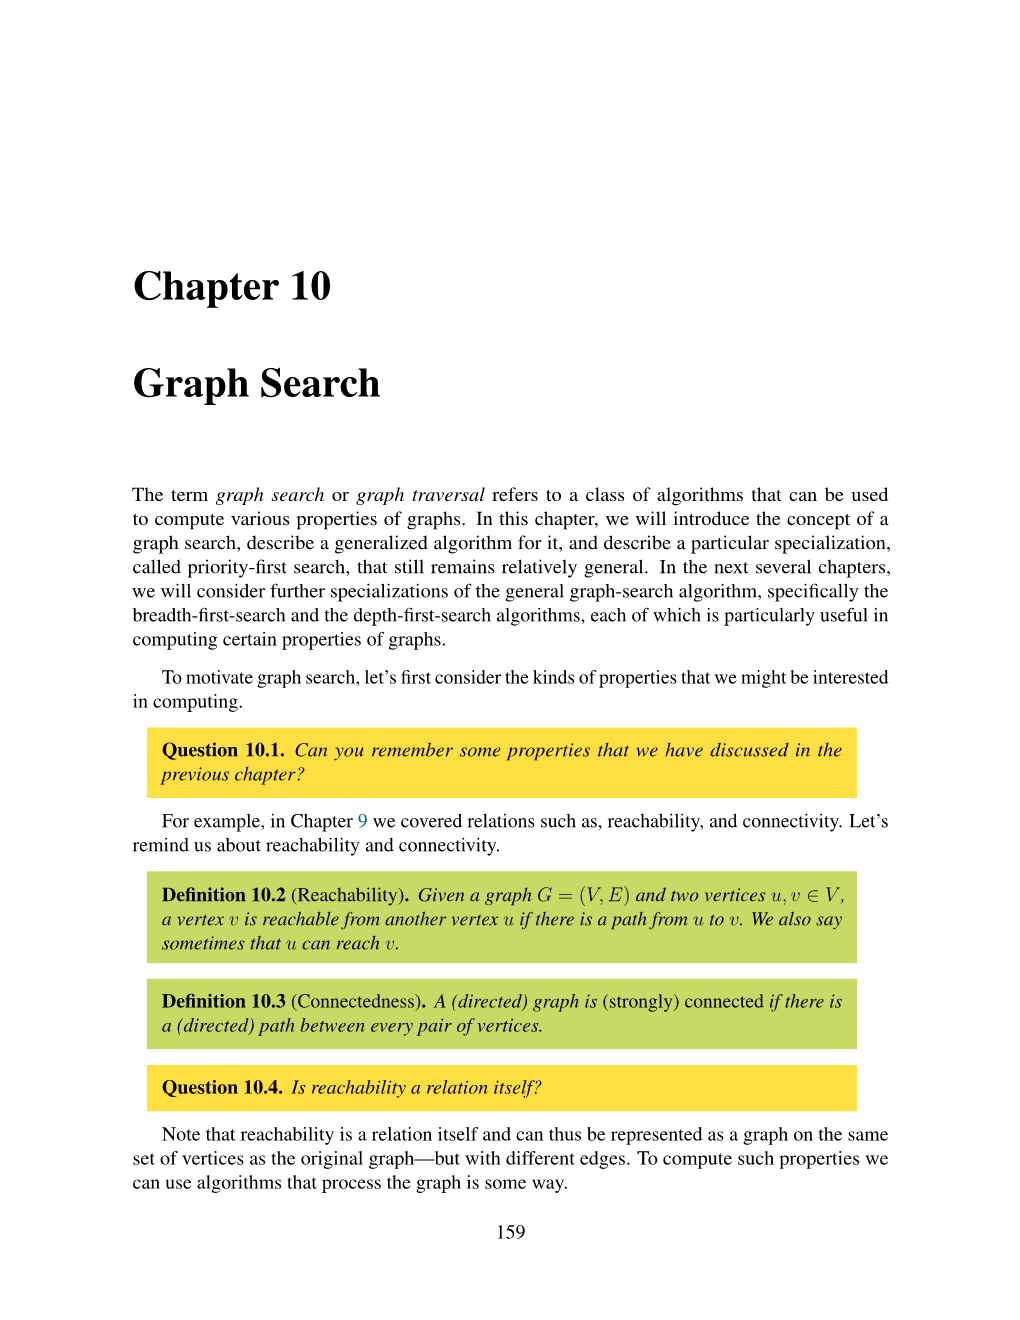 Chapter 10 Graph Search